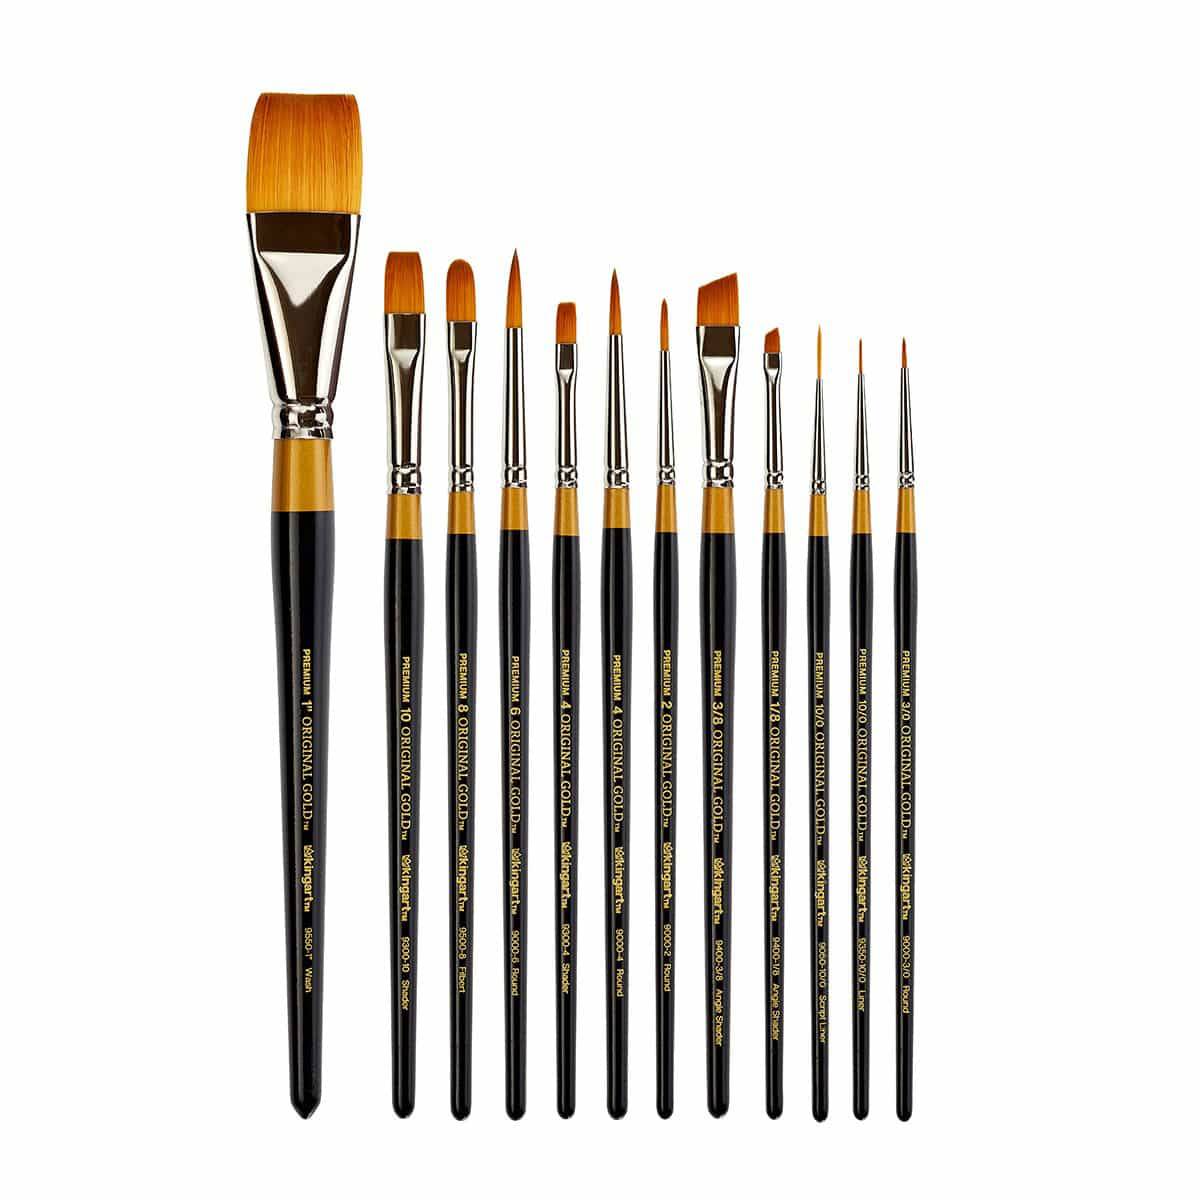 Original Gold Fan Series 9200 by Kingart™-UP TO 60% OFF - Brushes